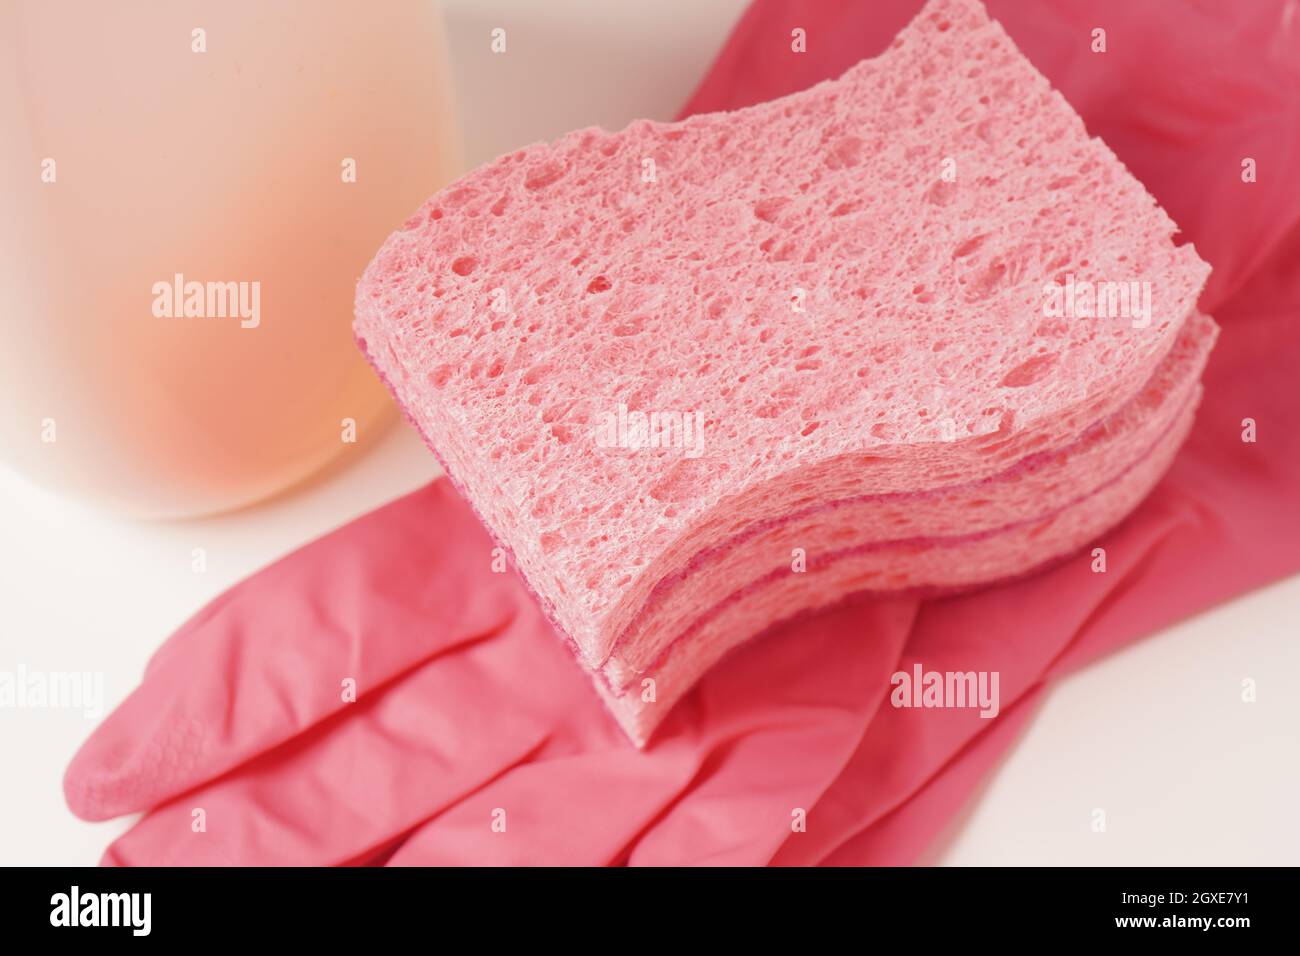 Sponges and rubber cloves for washing dishes and other domestic needs Stock Photo